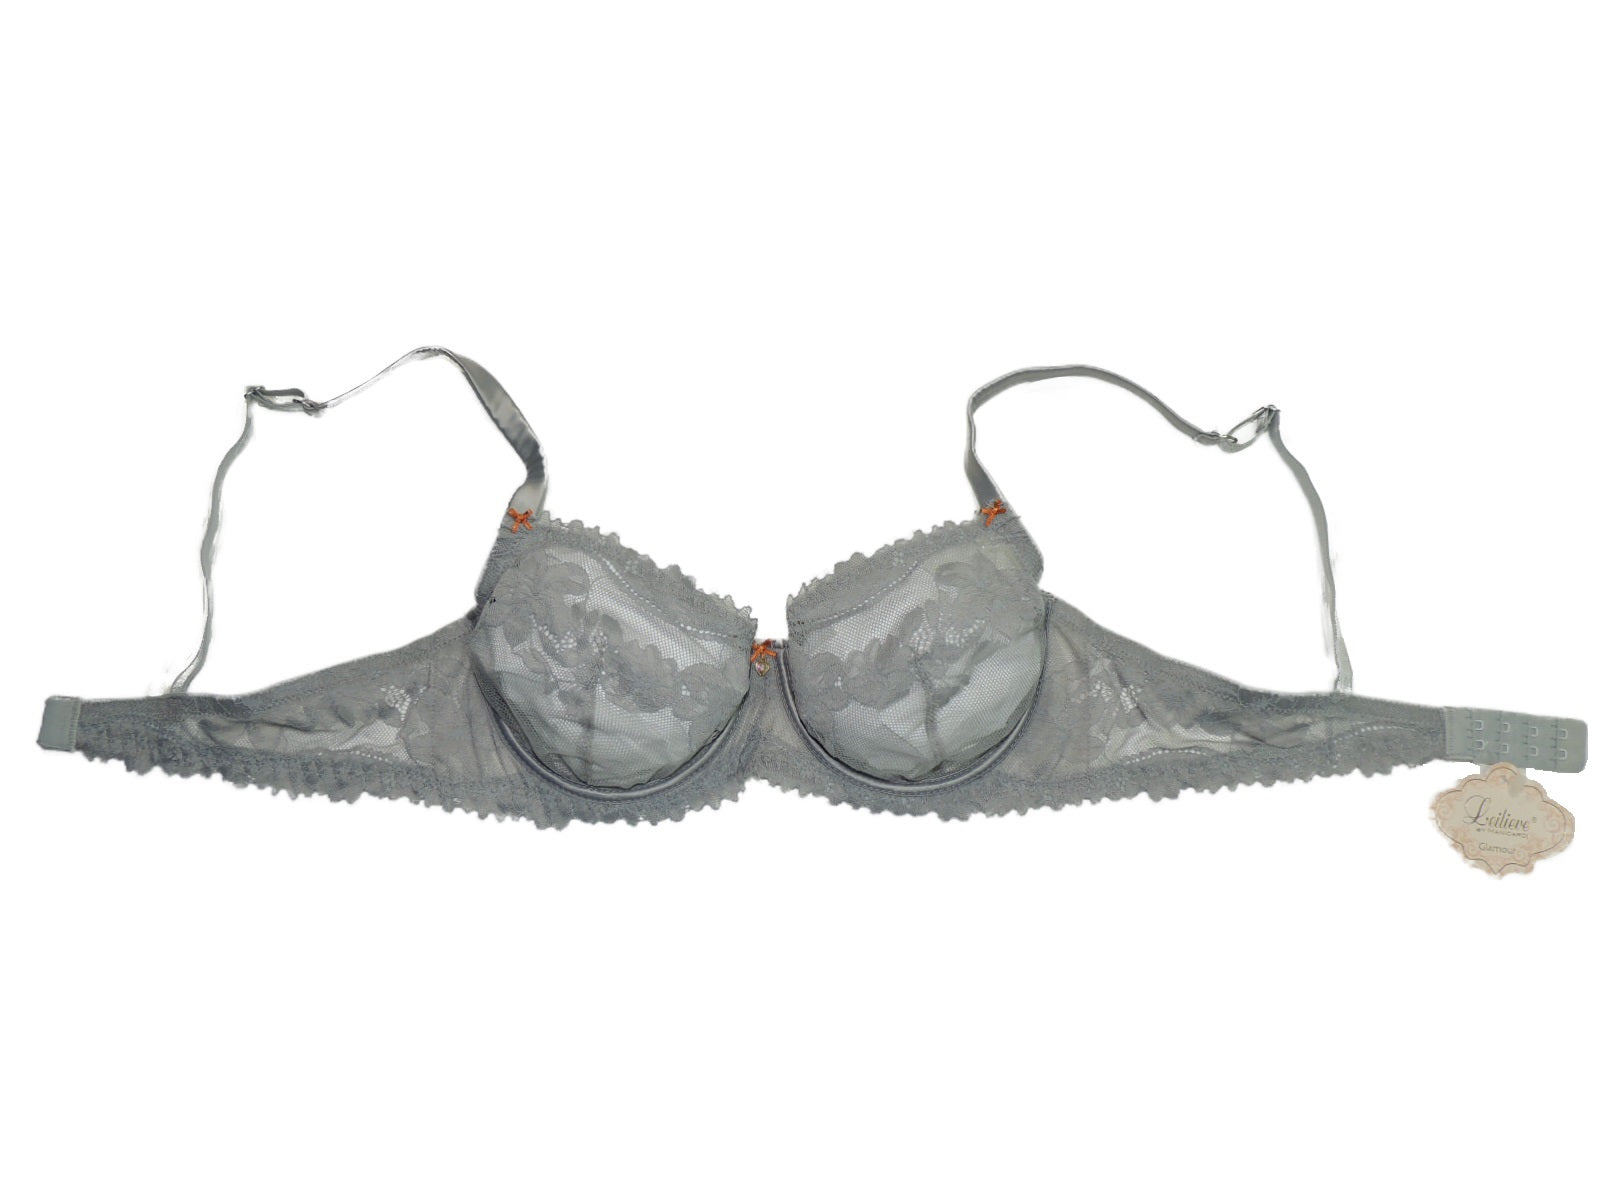 Unlined bra from the Privilege line by Leilieve from Italy at Di Moda Lingerie Toronto.